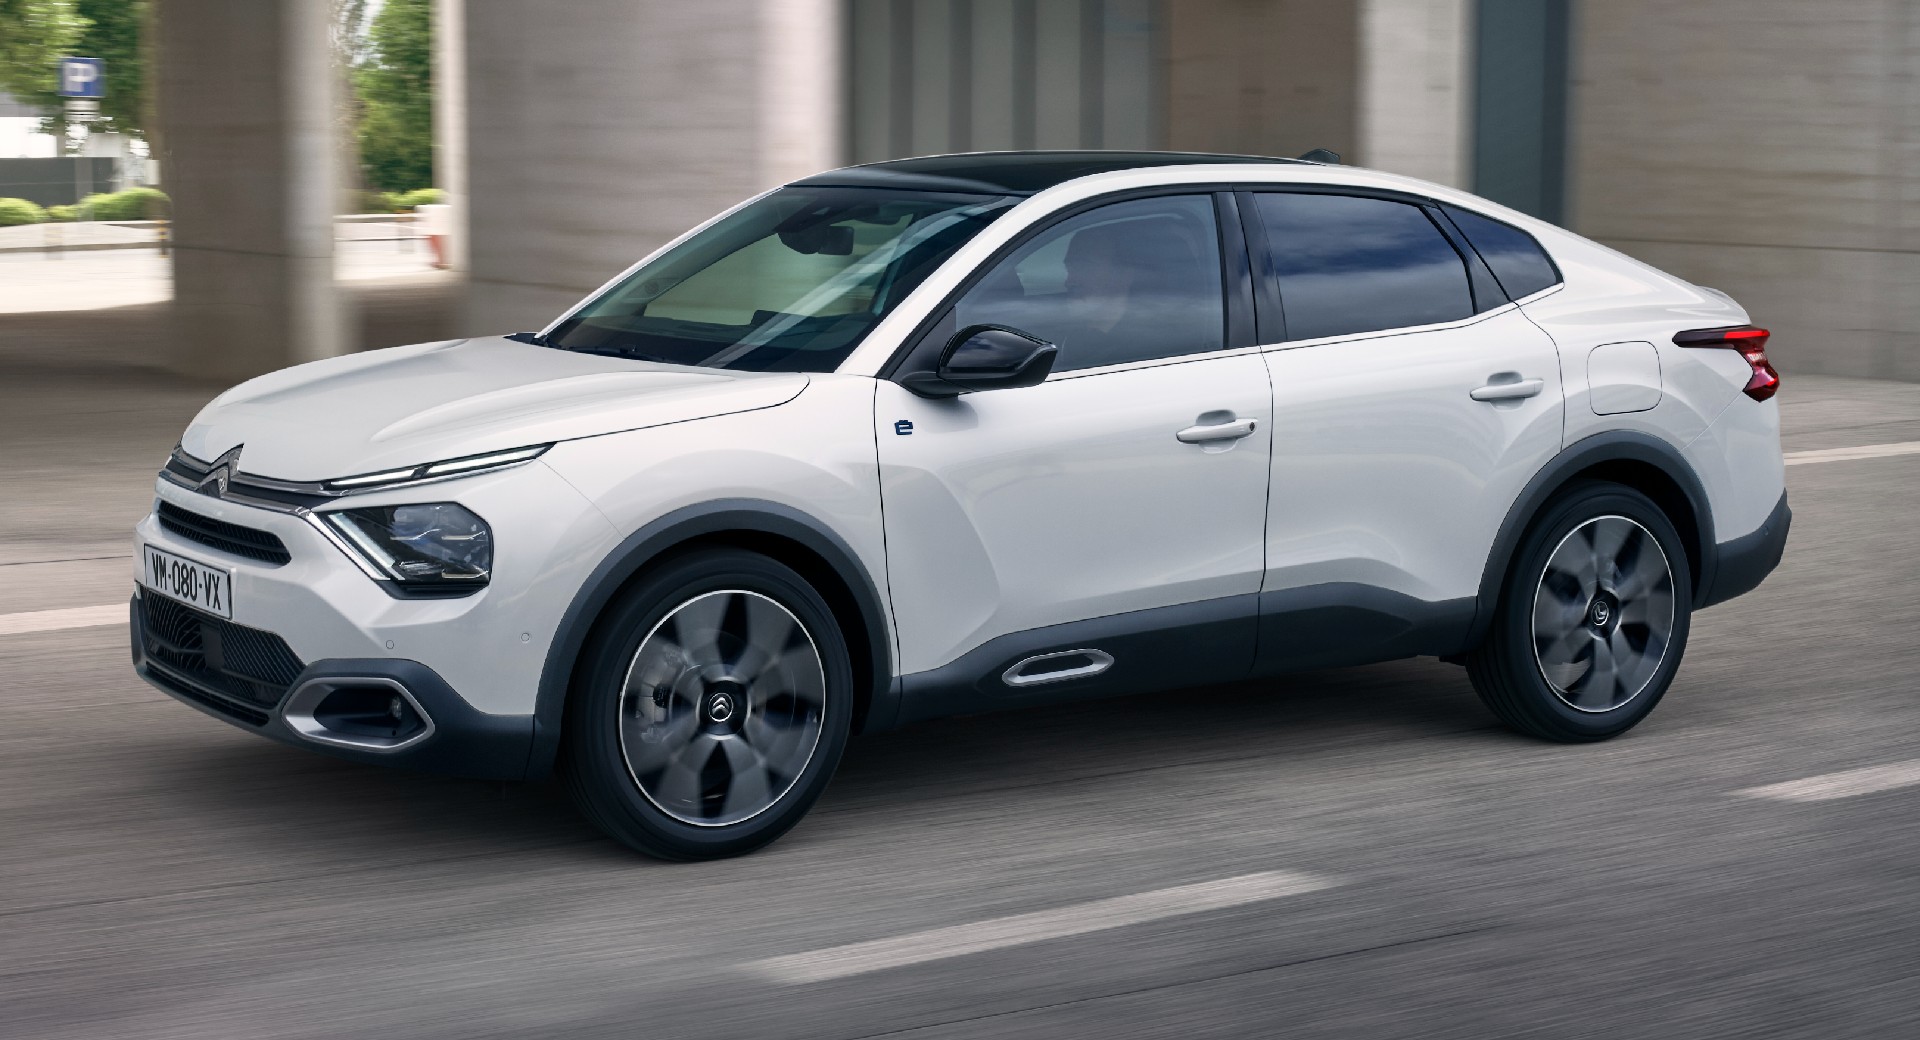 New Citroen C4 X Debuts In ICE And EV Versions As A Longer, More